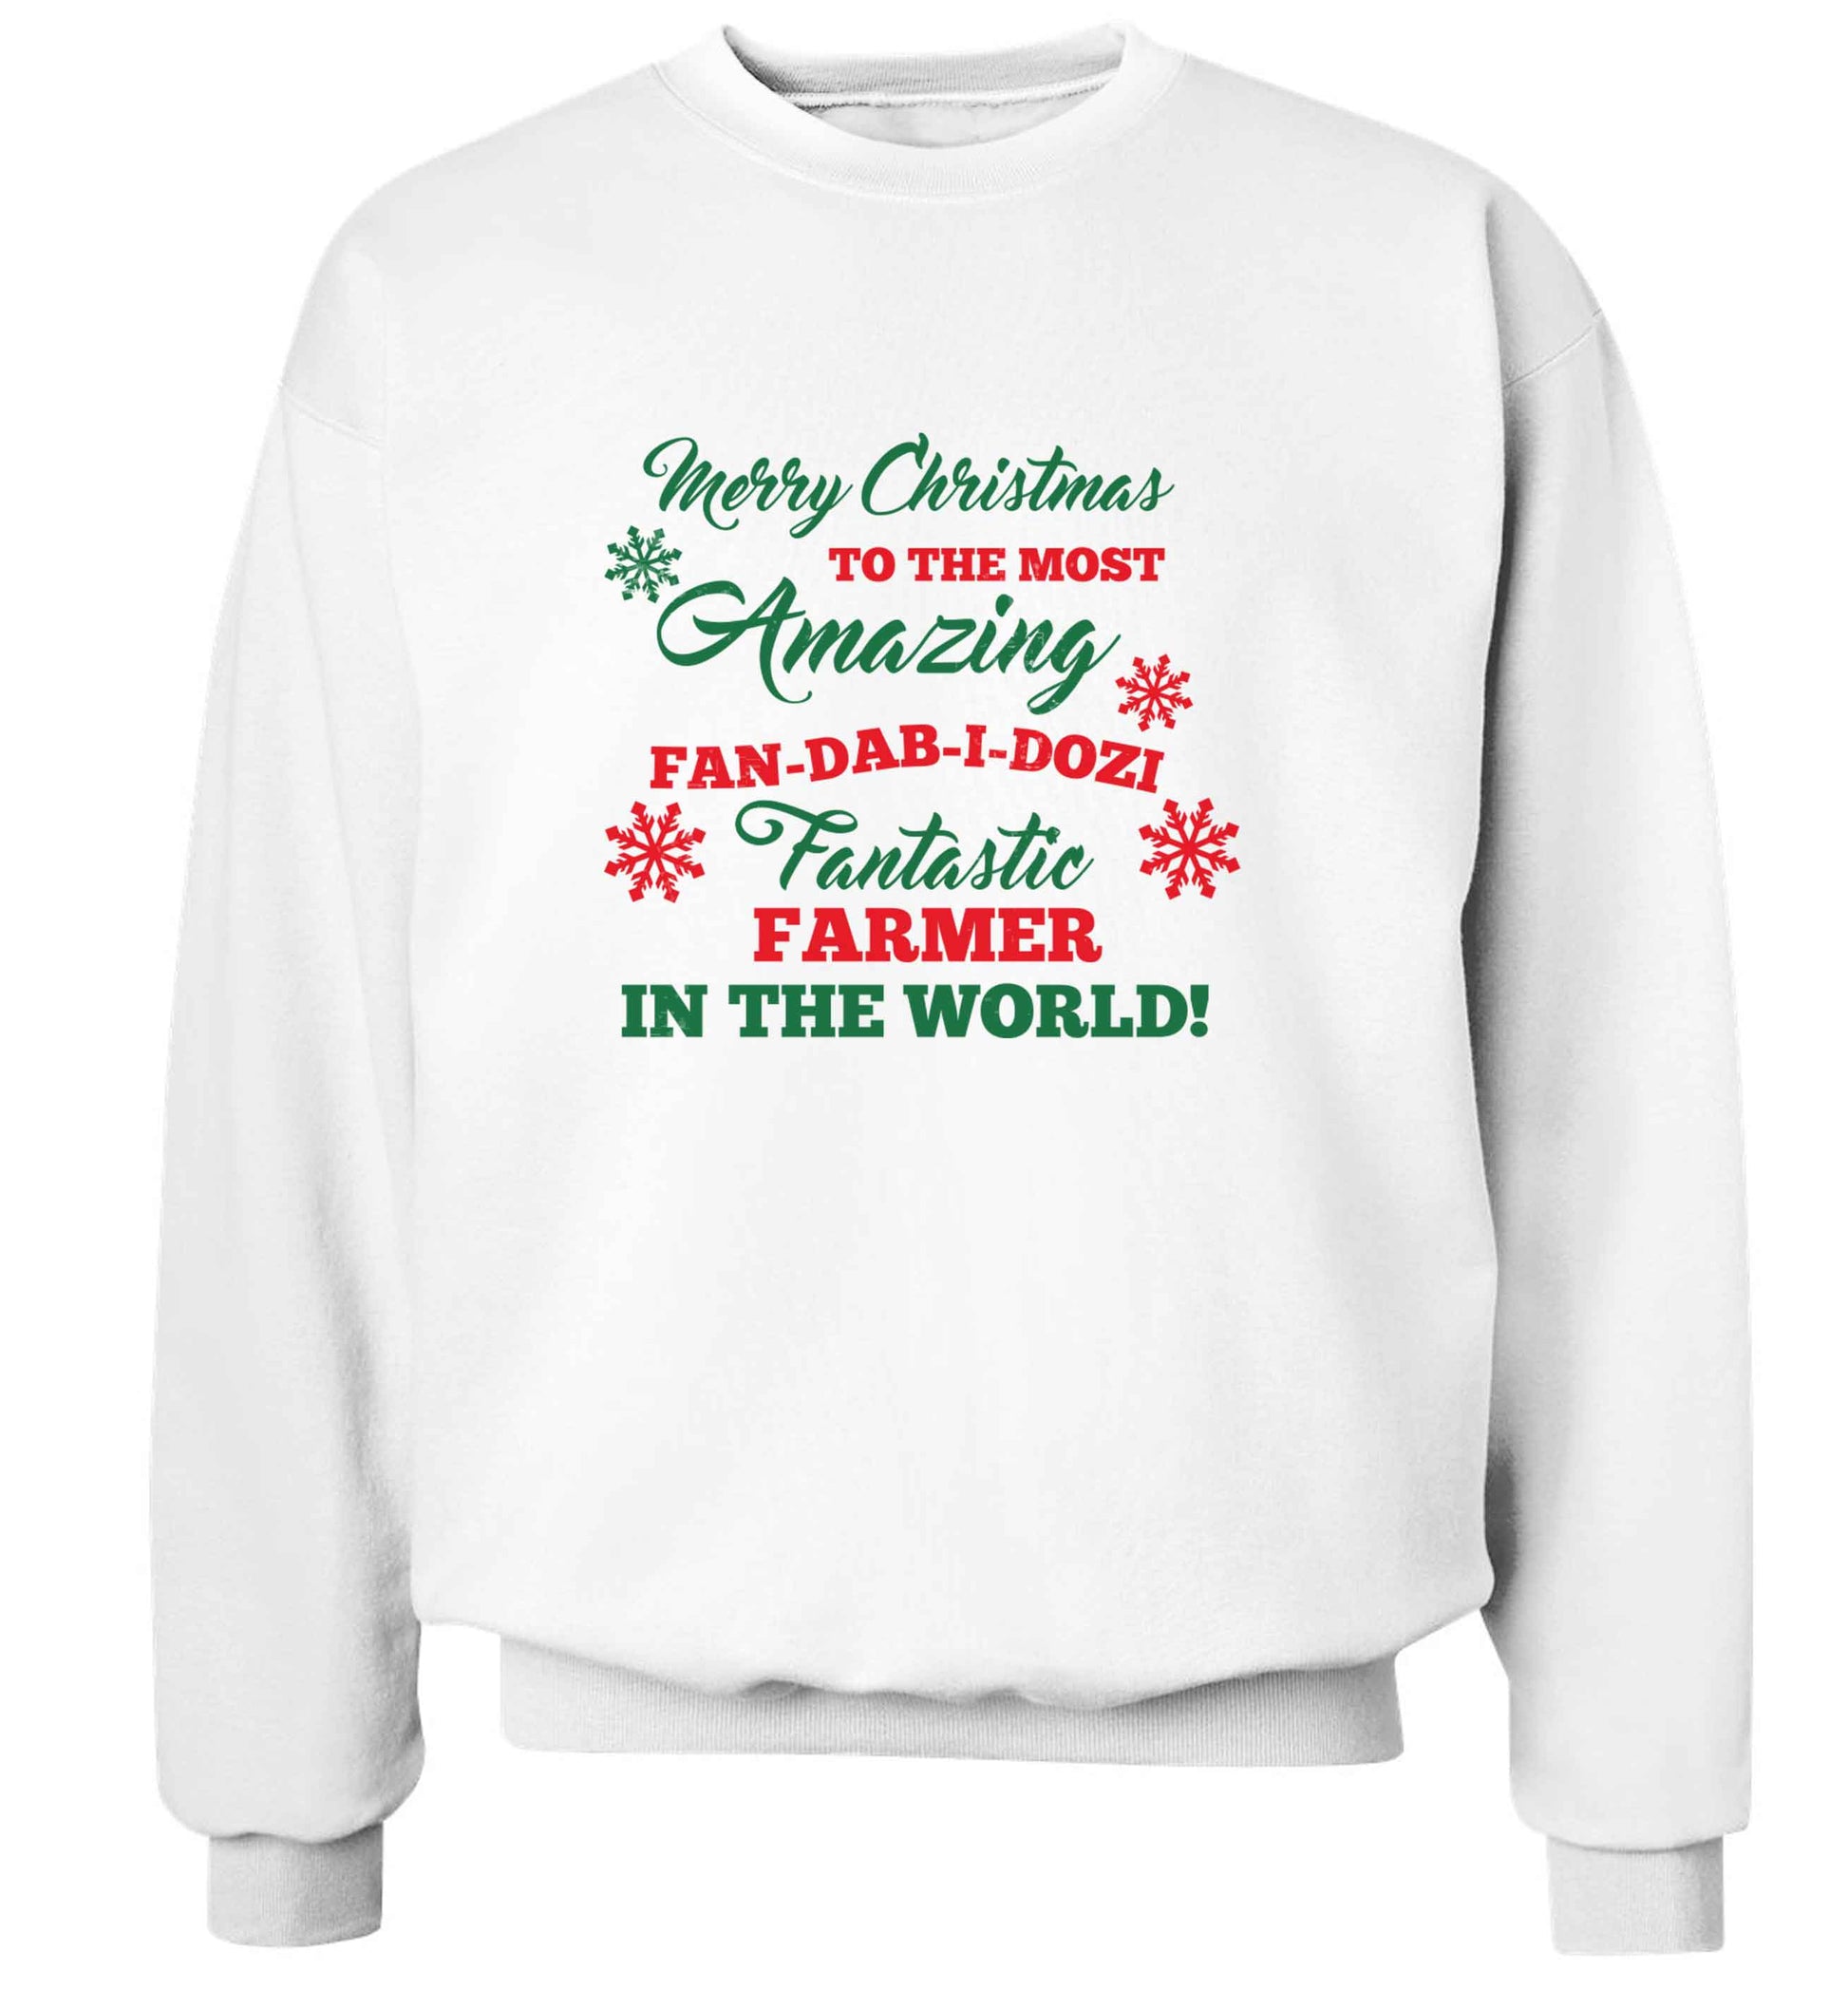 Merry Christmas to the most amazing farmer in the world! adult's unisex white sweater 2XL